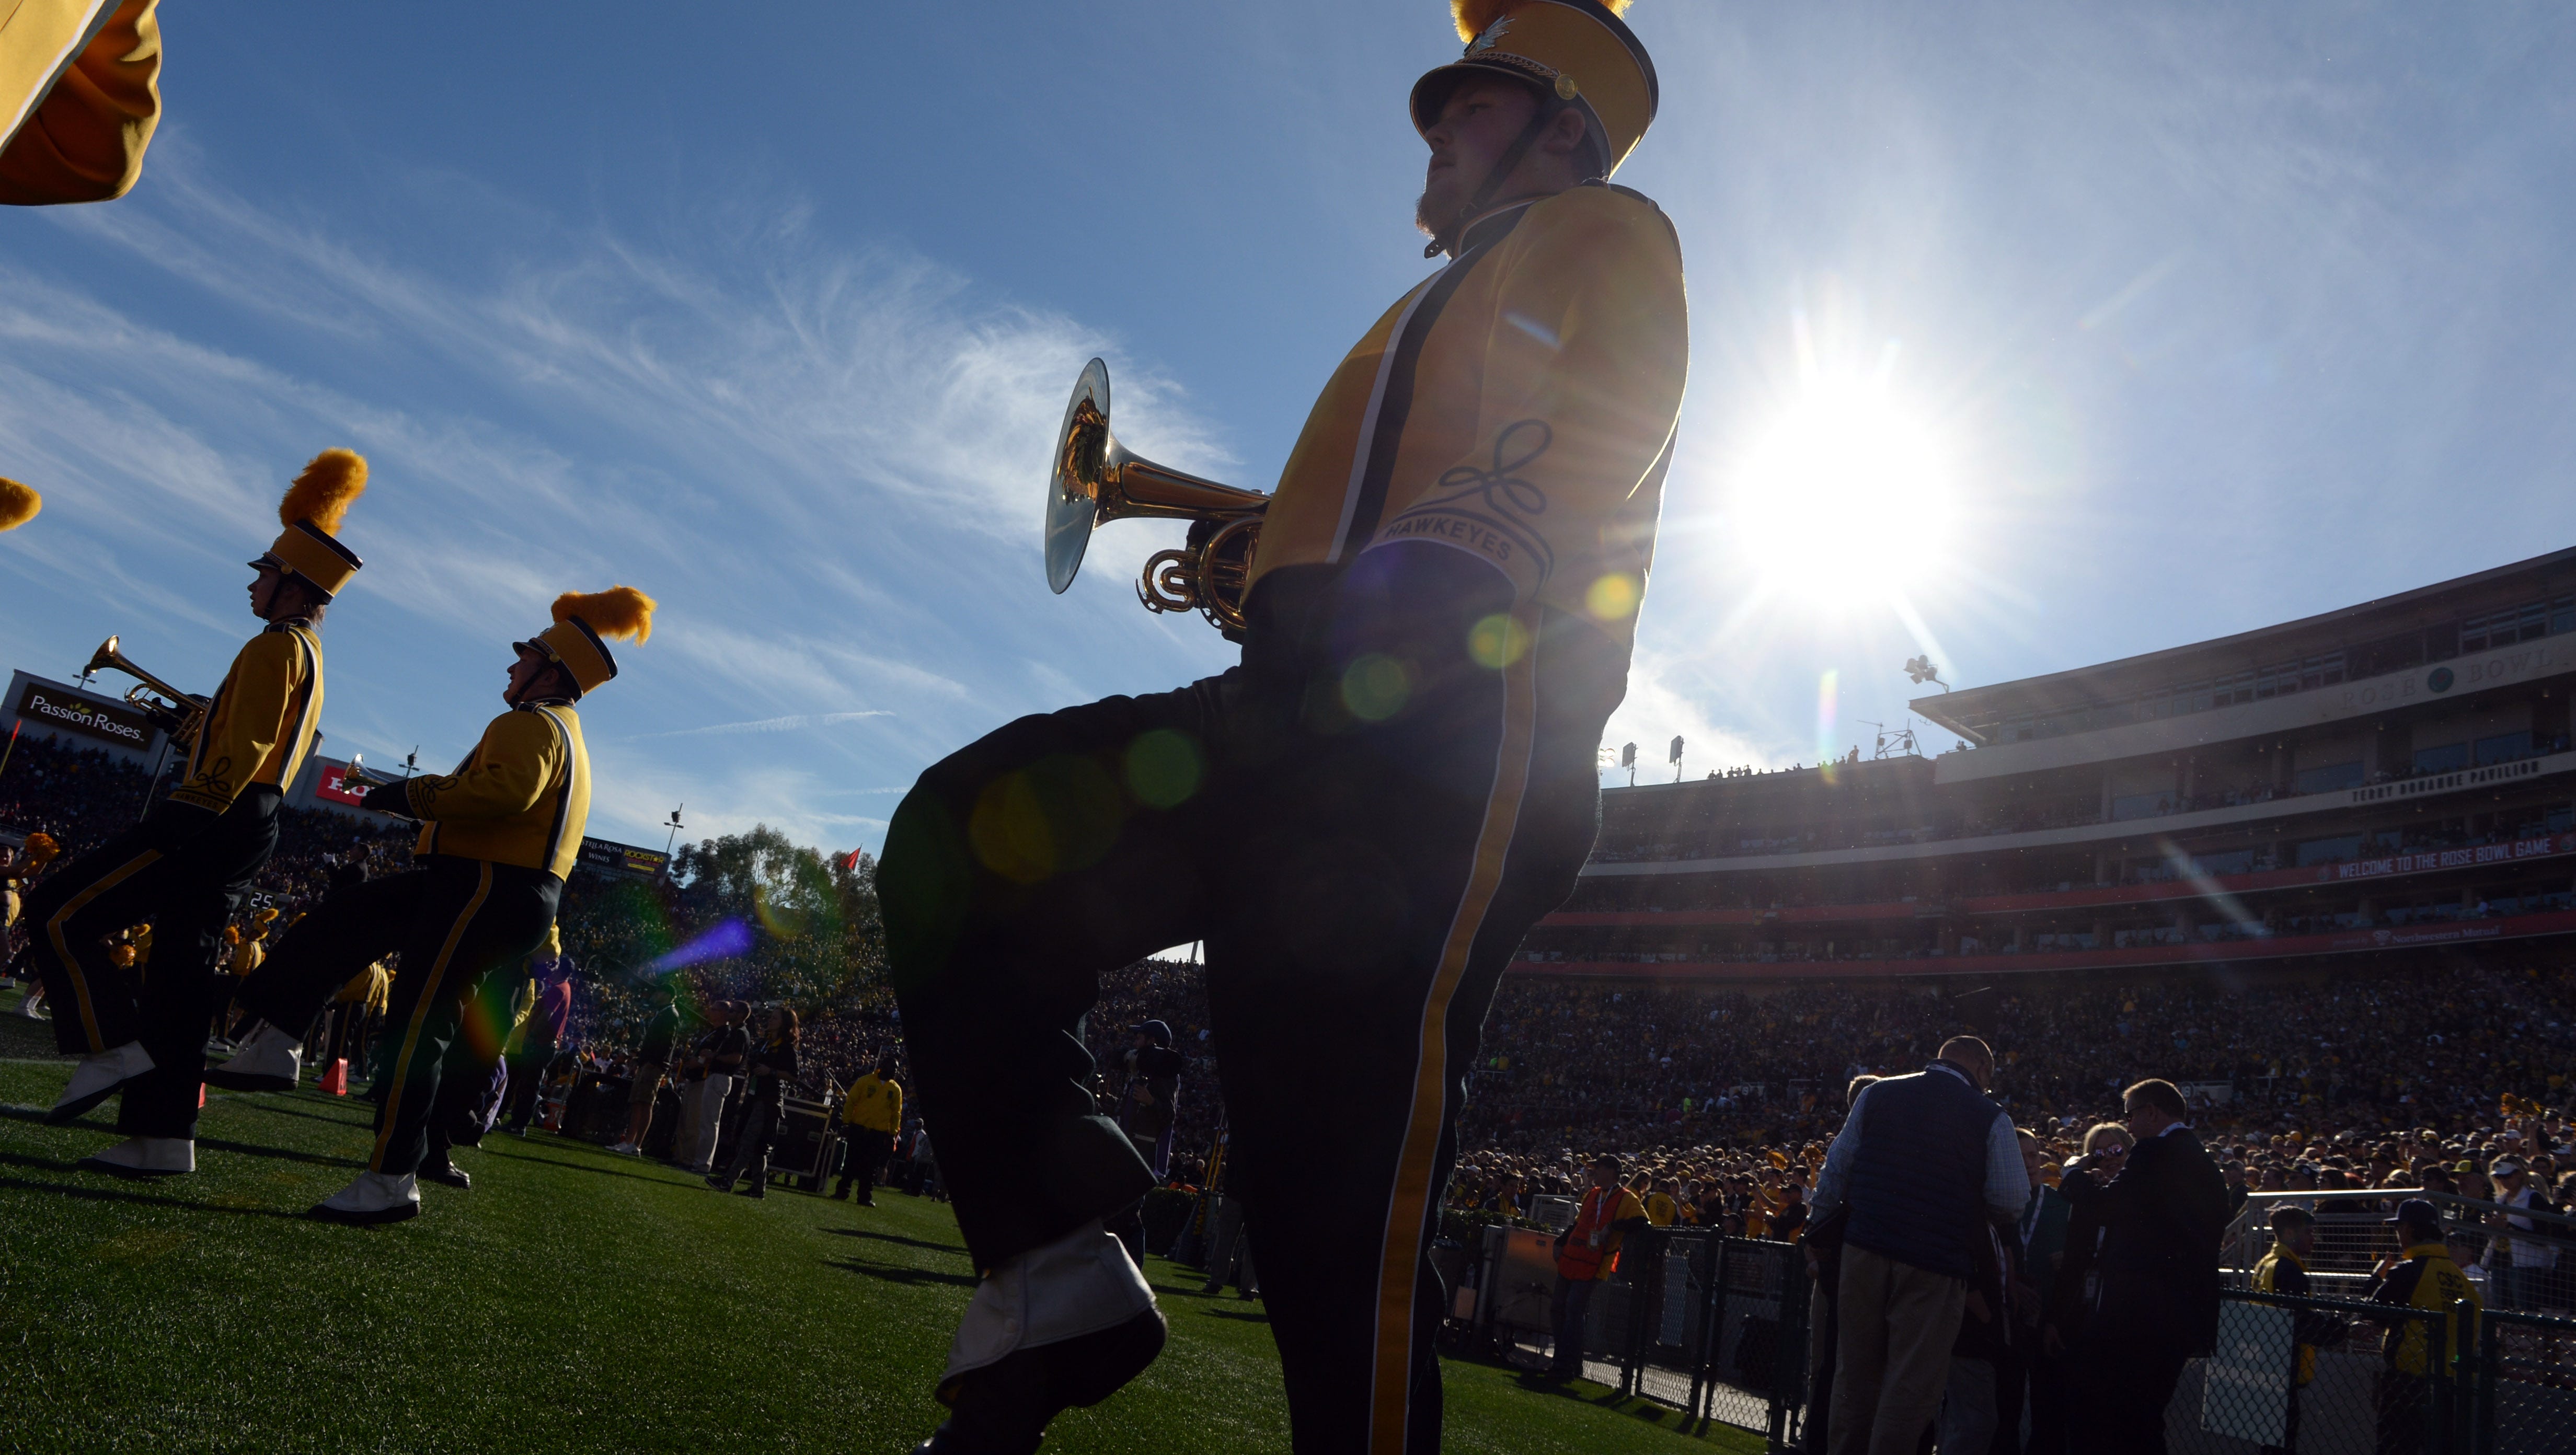 The Iowa Hawkeyes marching band performs before the game between the Iowa Hawkeyes and the Stanford Cardinal in the 2016 Rose Bowl at Rose Bowl.